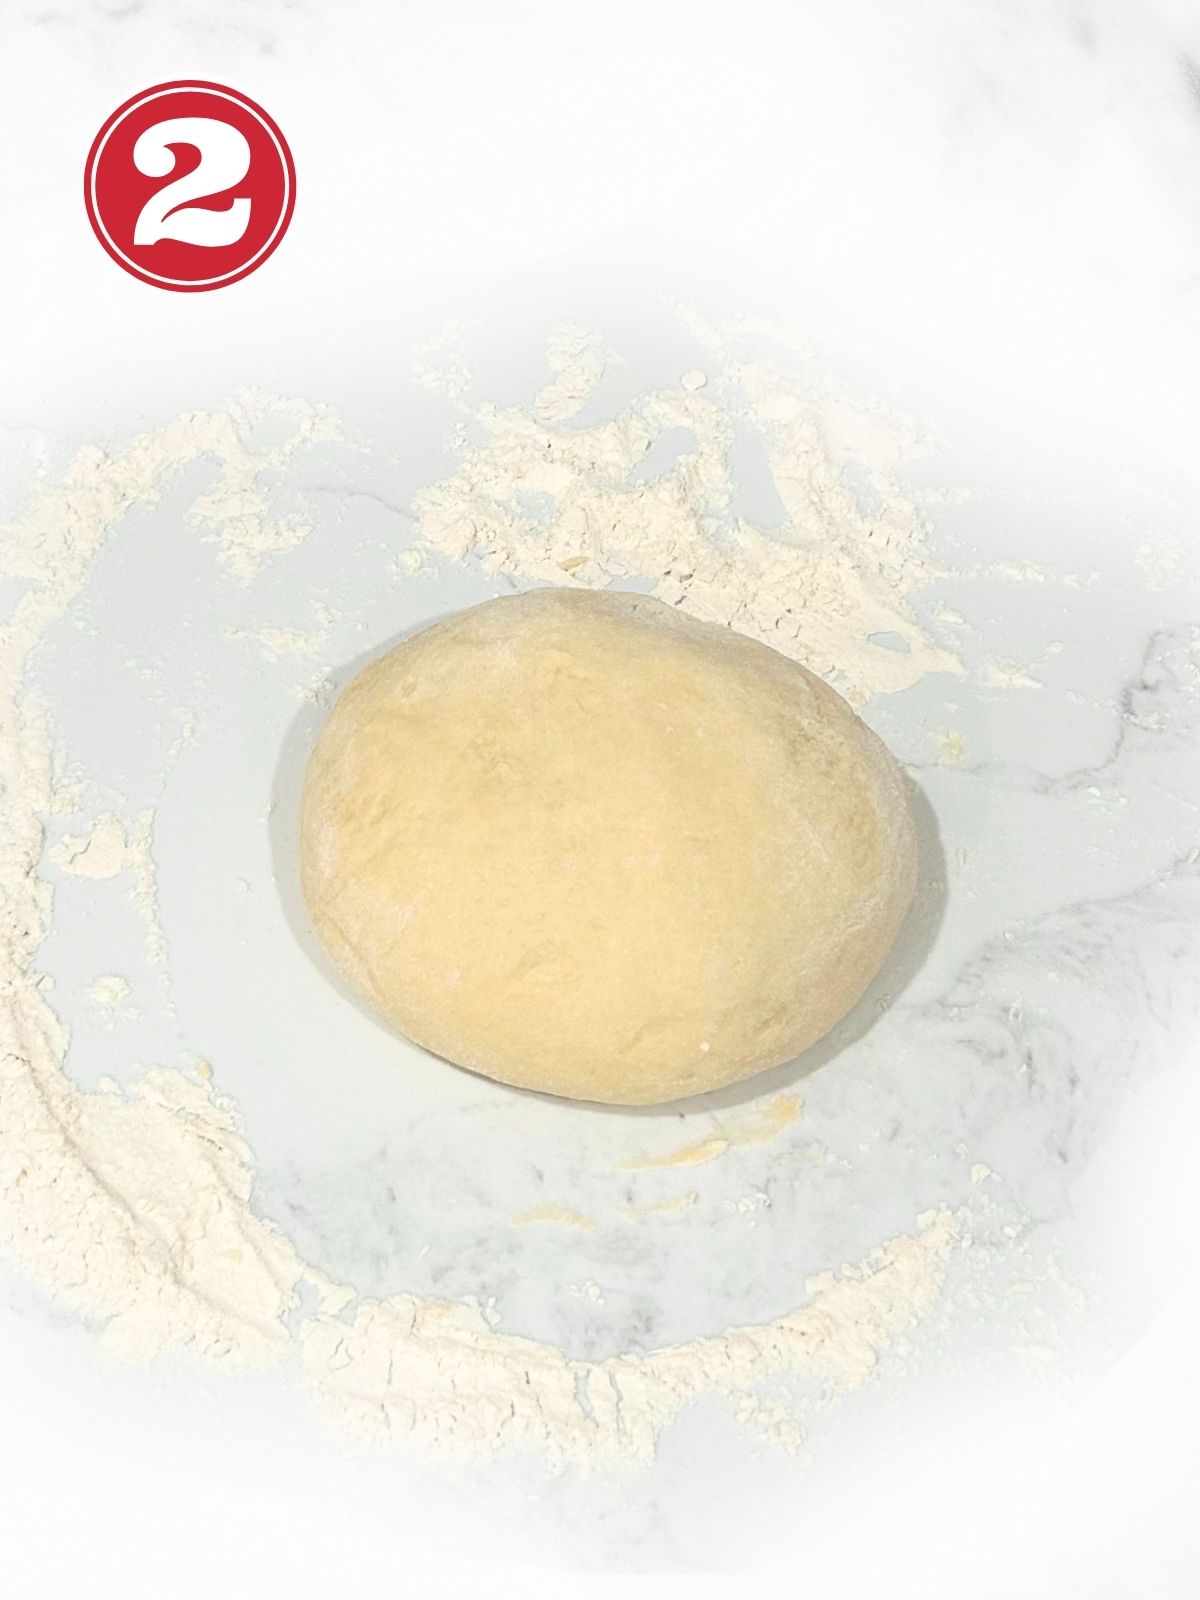 dough resting on a floured surface